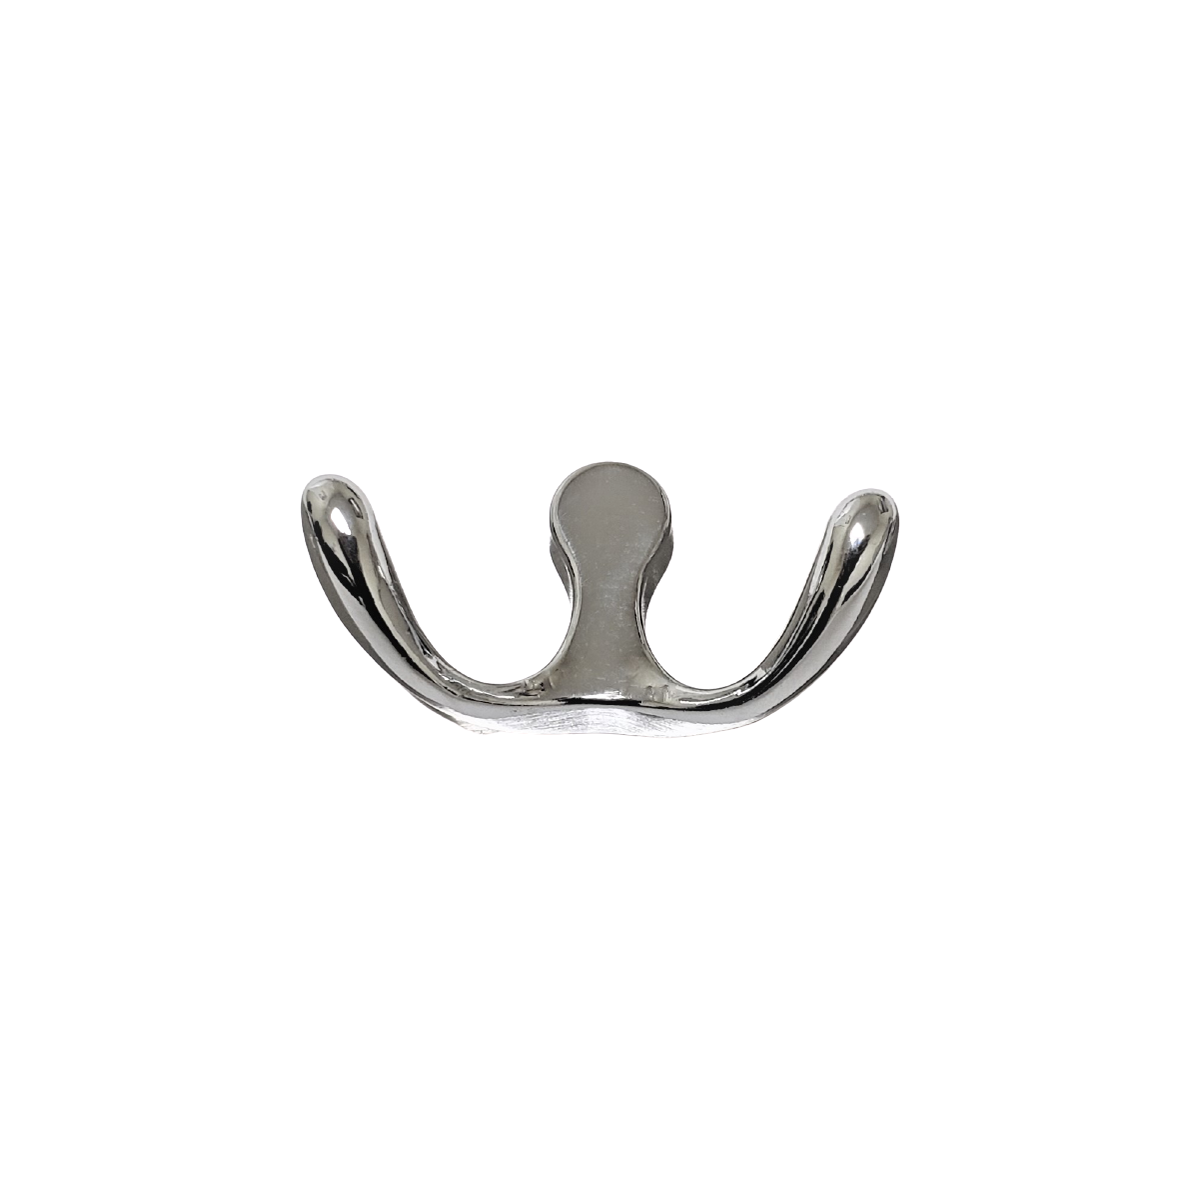 Coat Rack Hook Stainless Steel, Wall Mounted | Prima Decorative Hardware